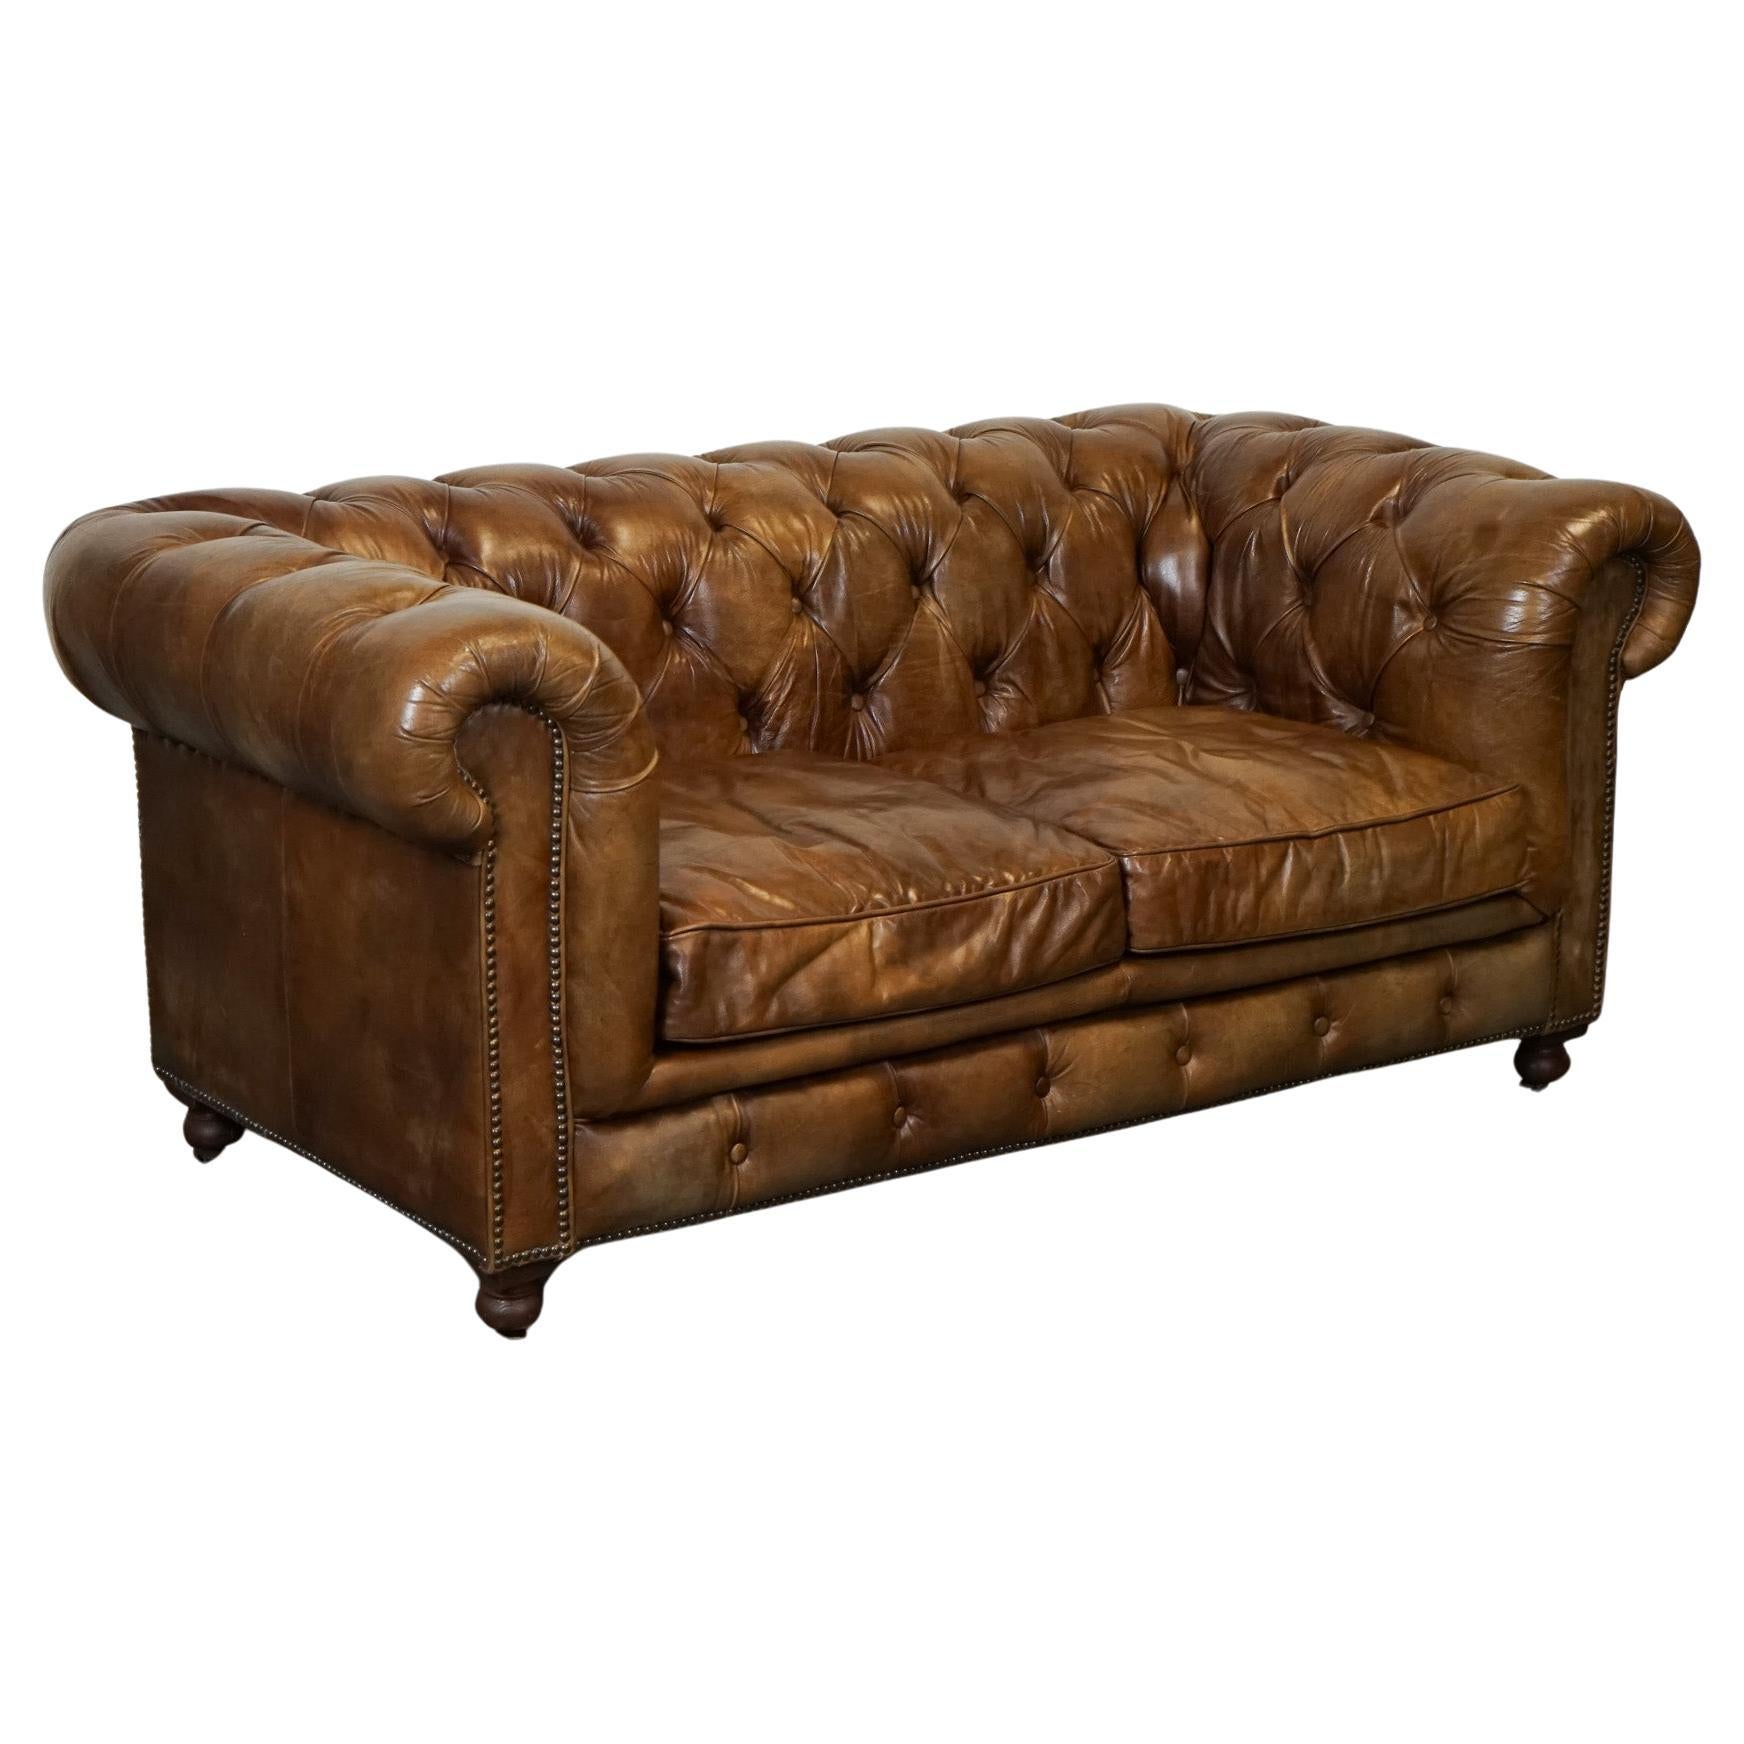 GORGEOUS TIMOTHY OULTON CHESTERFIELD SOFA BY HALO HERiTAGE BROWN LEATHER J1